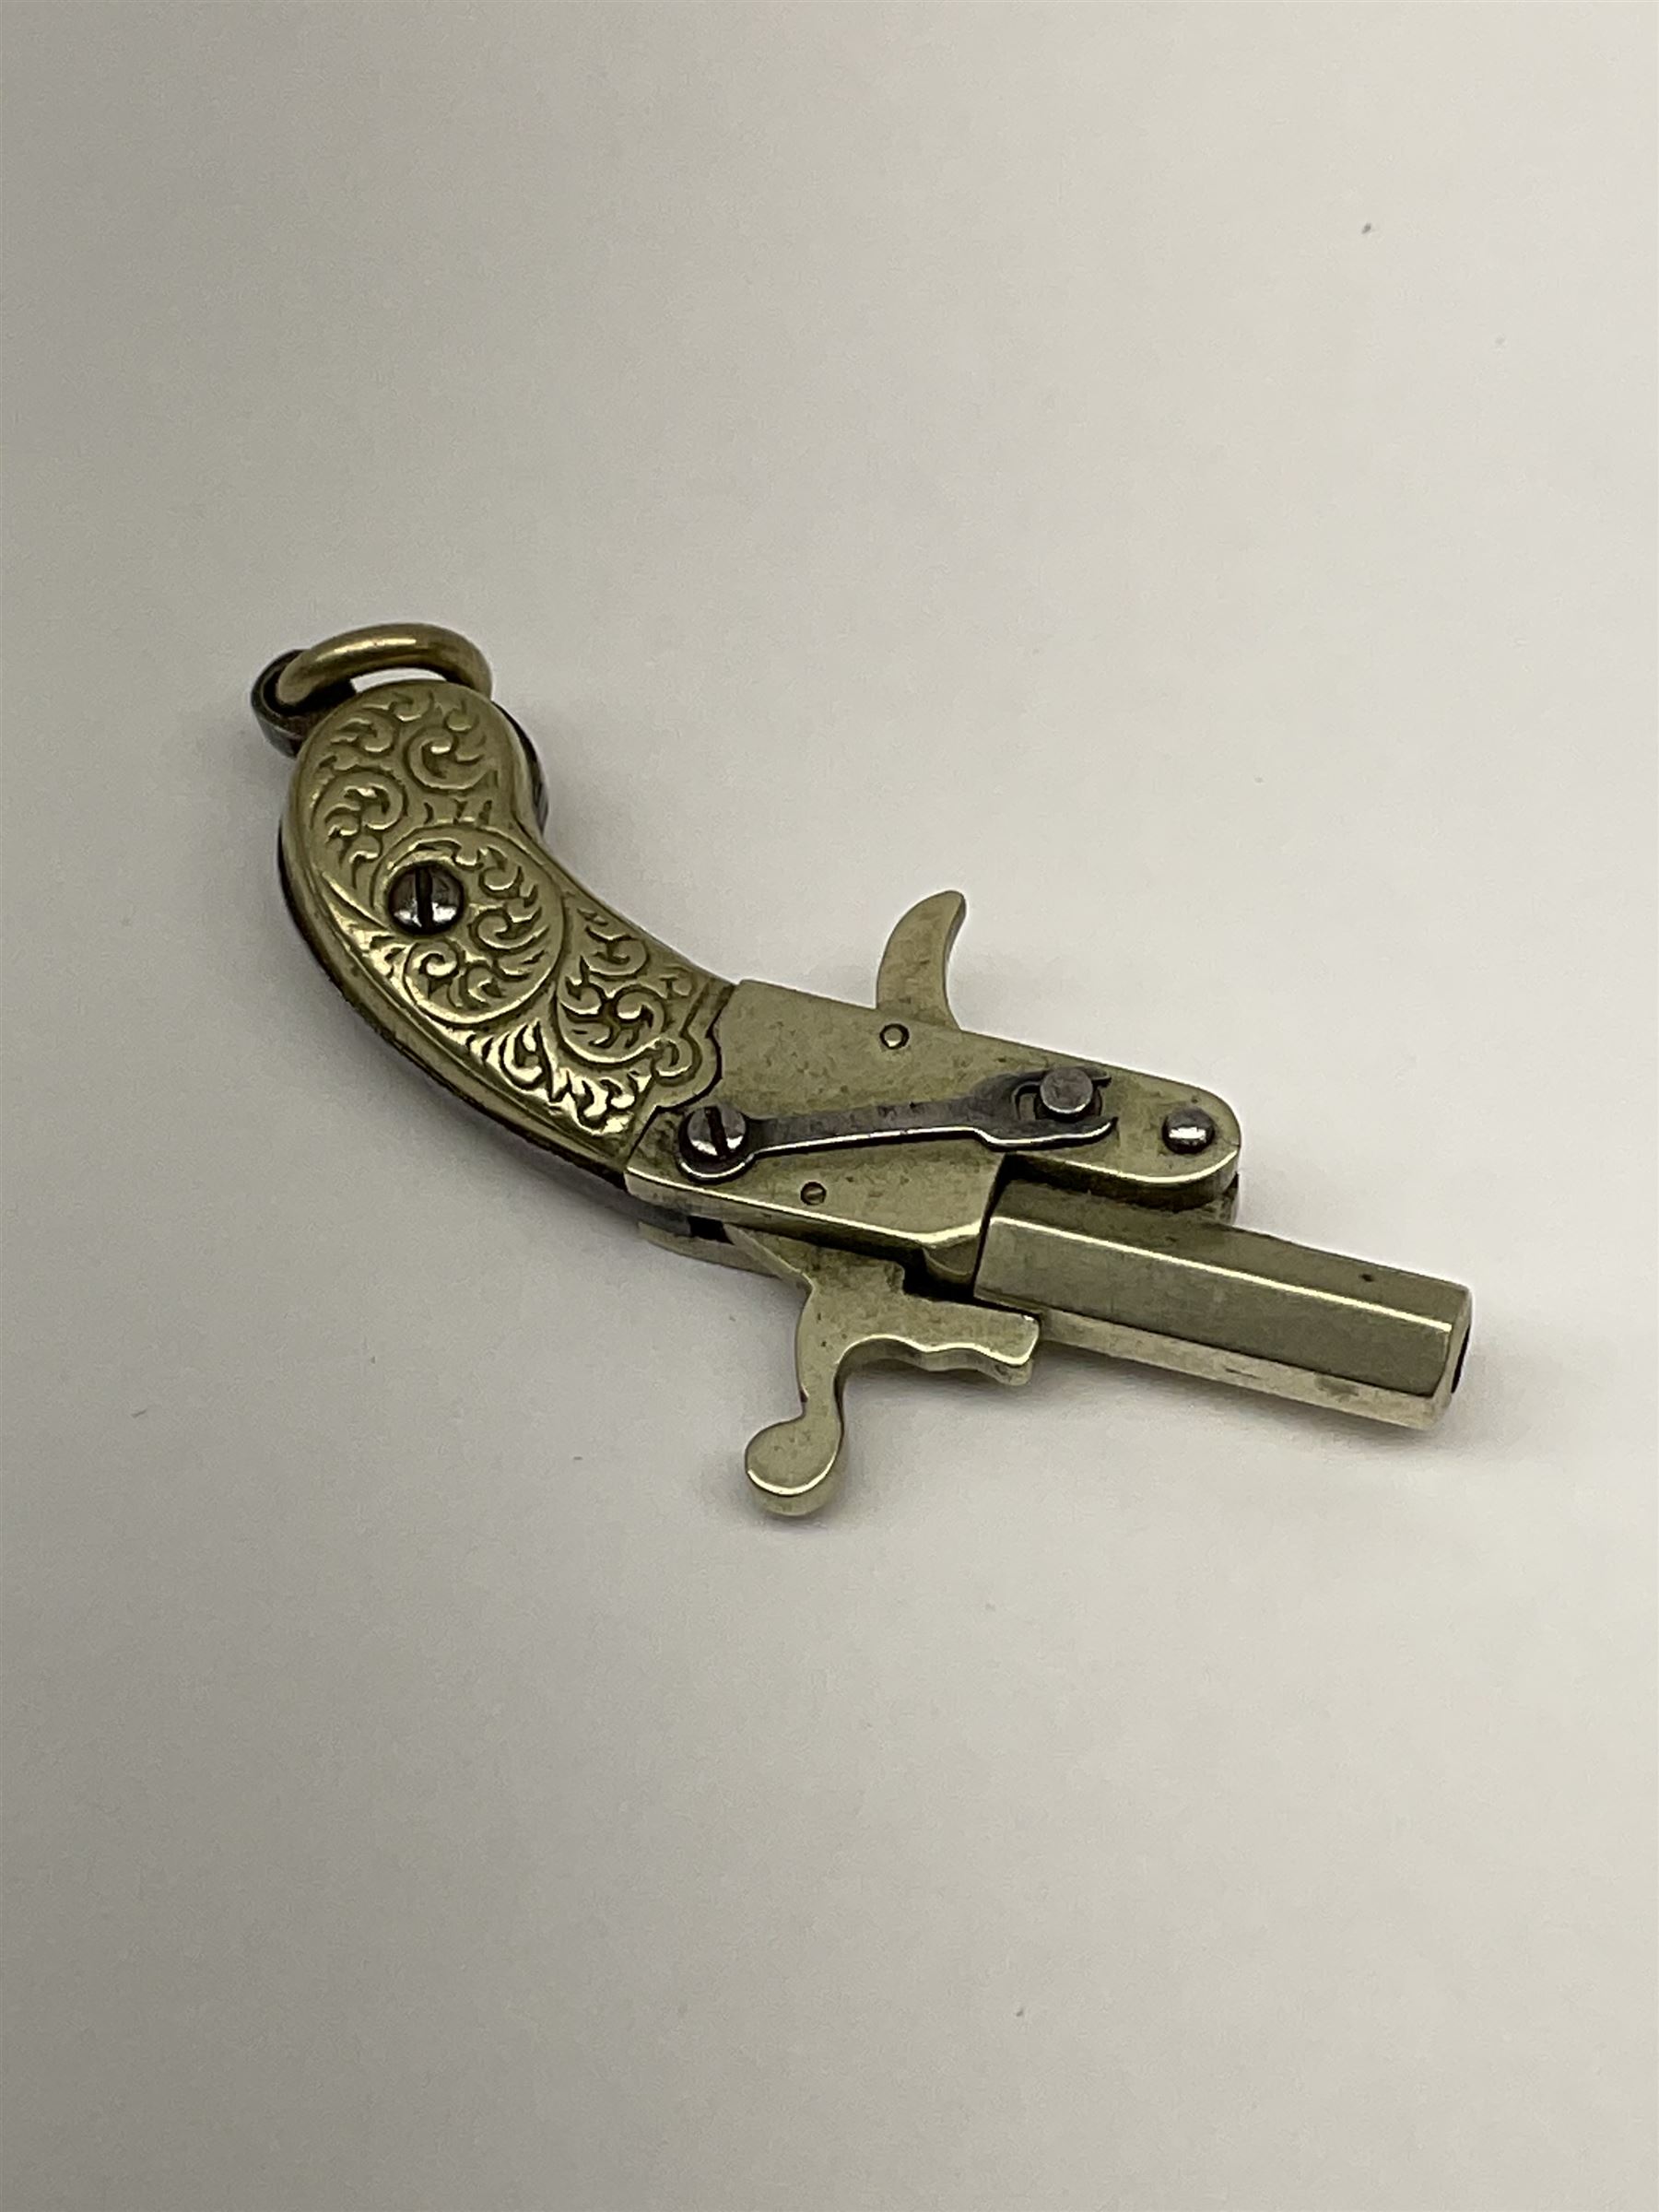 Miniature all nickel .22 pin fire single shot pistol with engraved grip and suspension ring to the b - Image 4 of 5